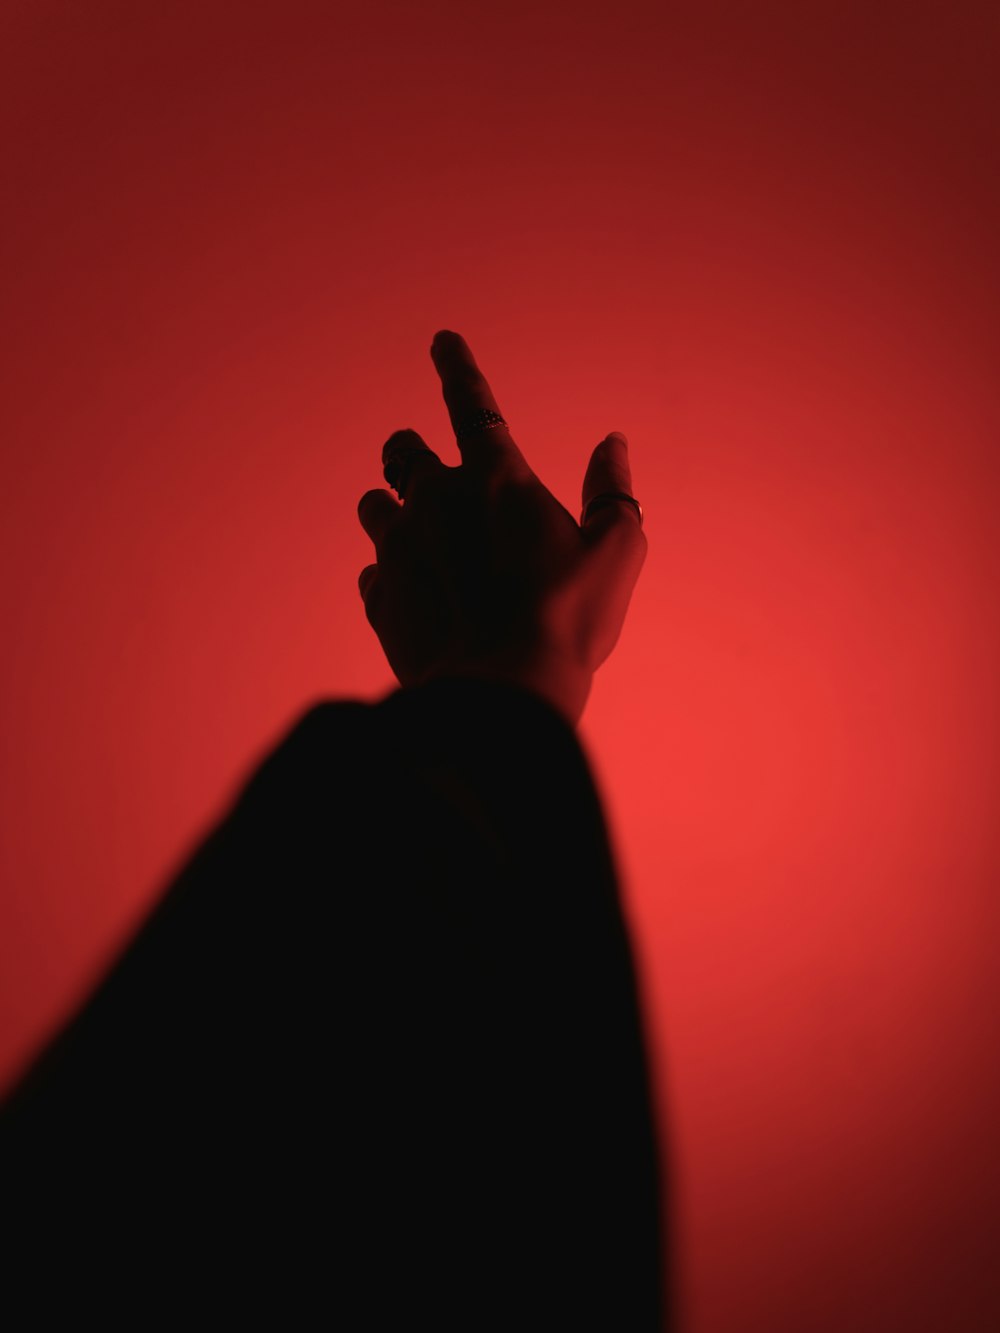 Silhouette of person raising right hand photo – Free Red Image on Unsplash